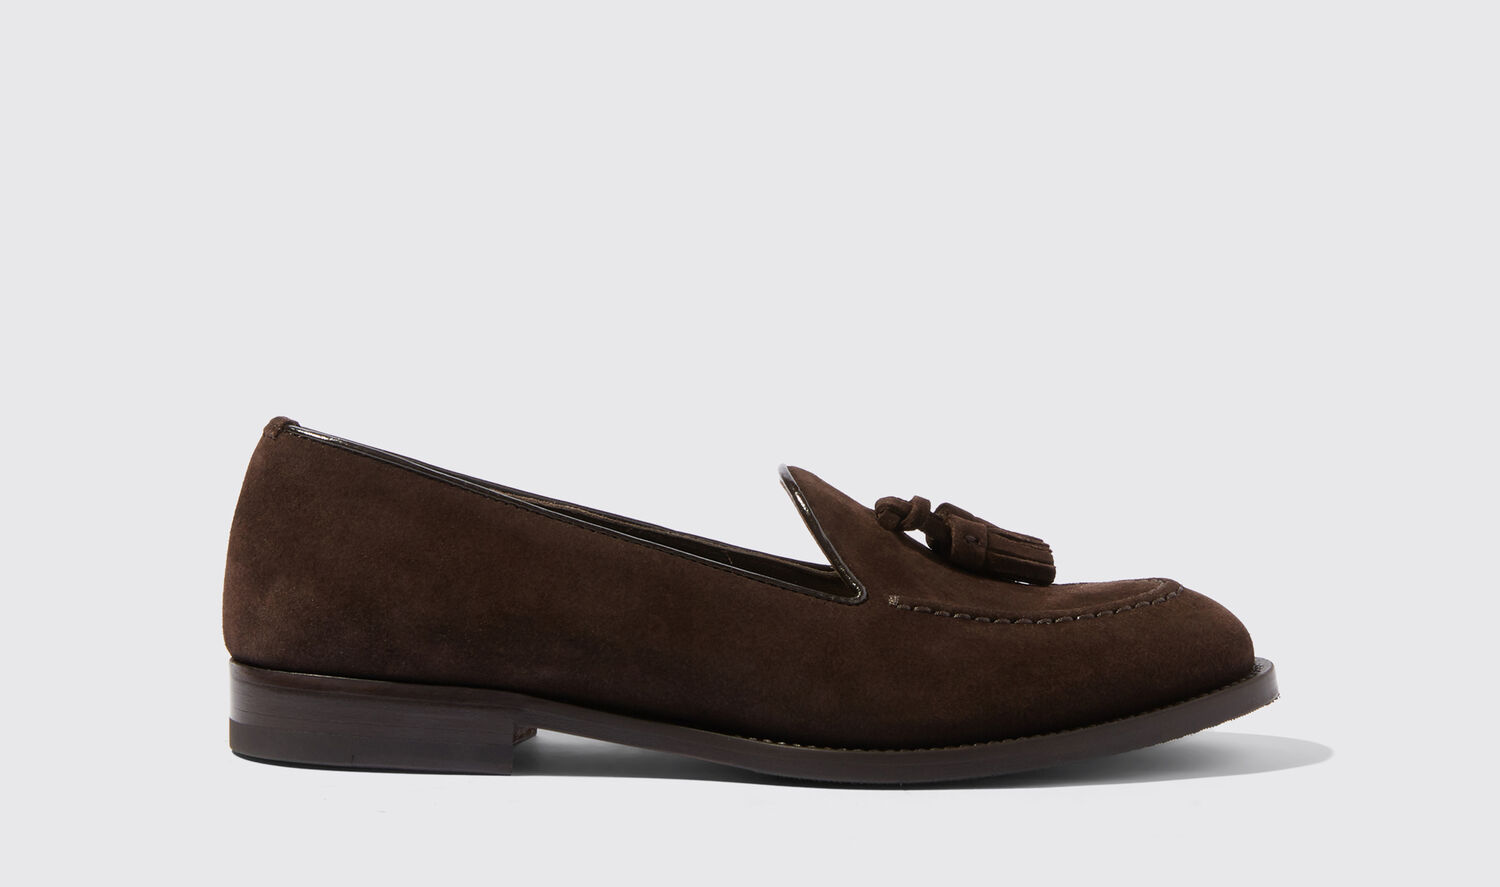 Scarosso Sienna Tasselled Leather Loafers In Brown - Suede